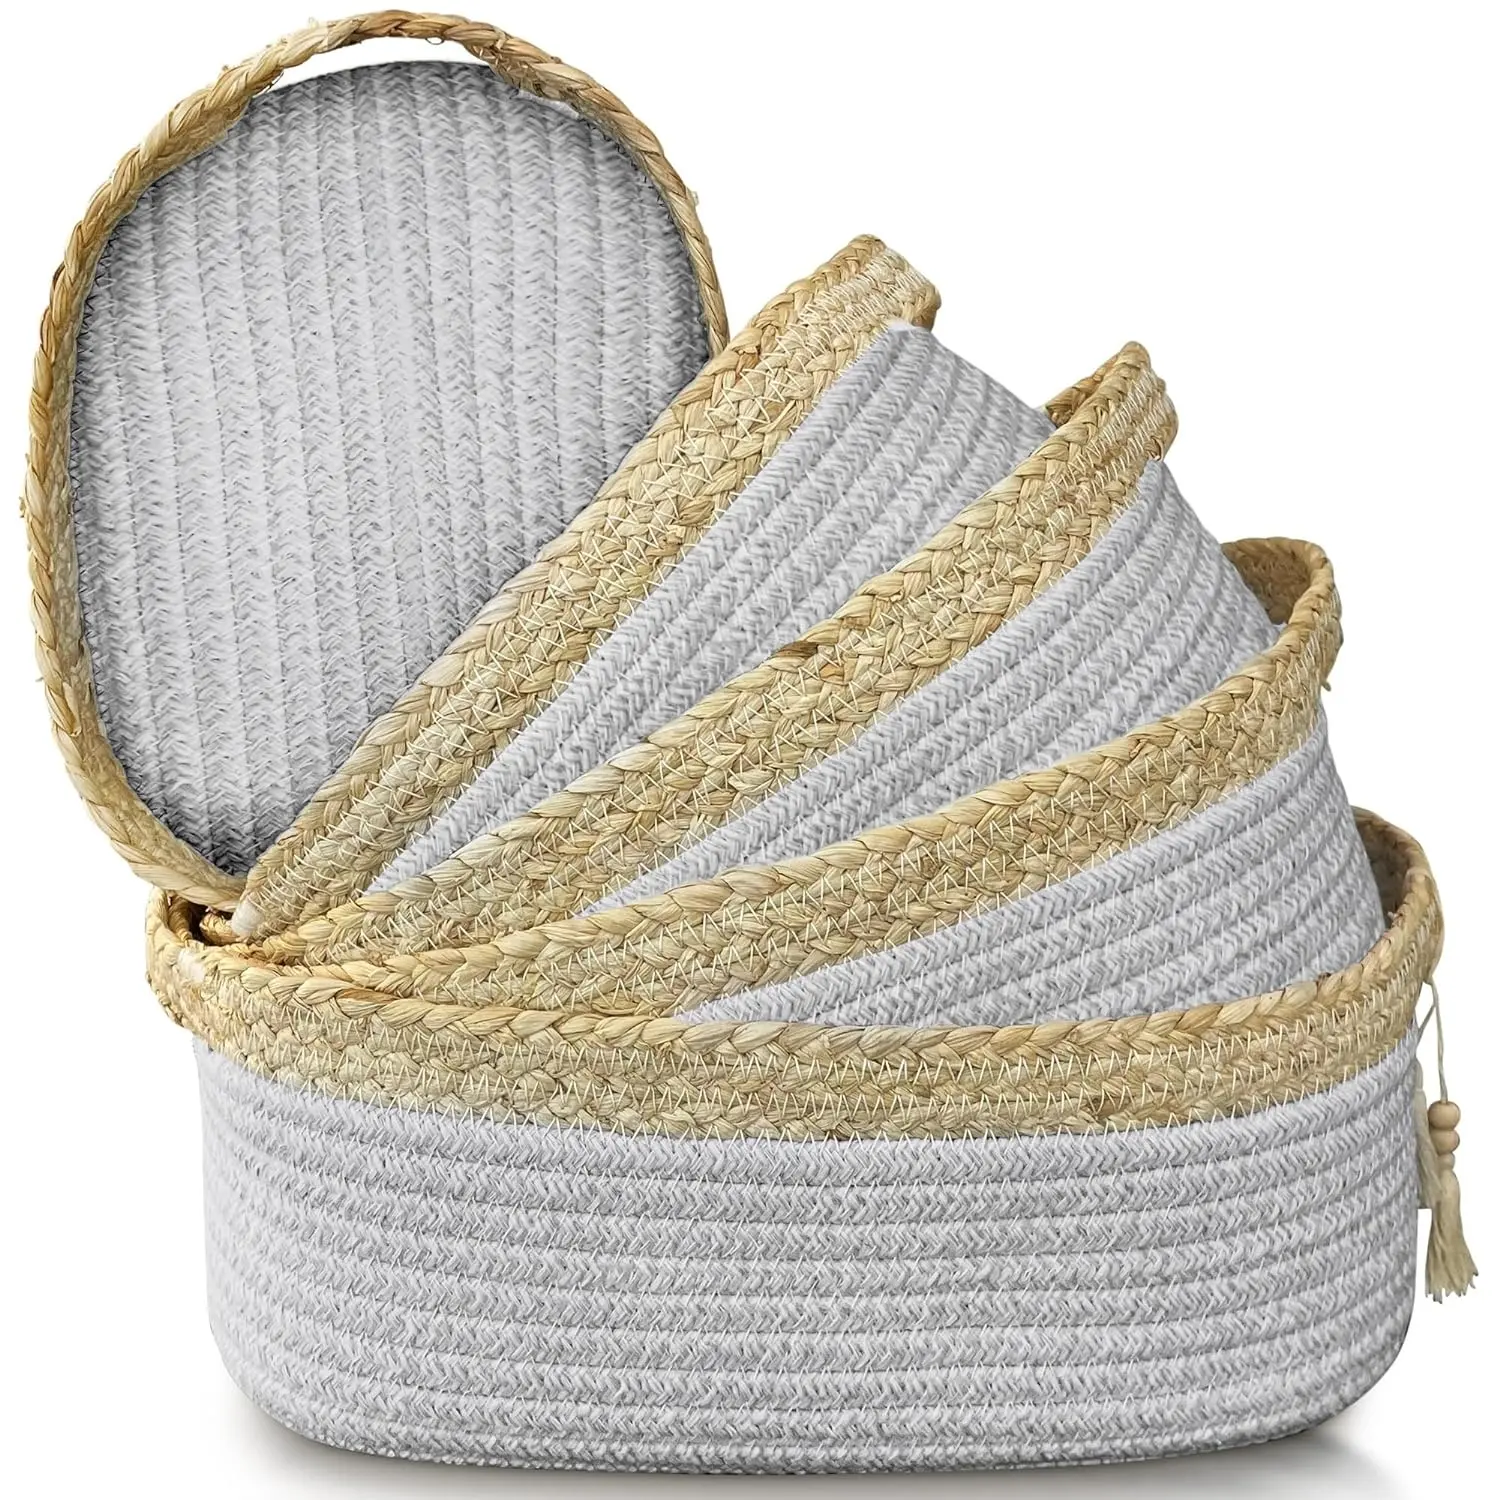 Home decor hampers collapsible bathroom livingroom bedroom kitchen woven cotton rope hand storage basket for organizing